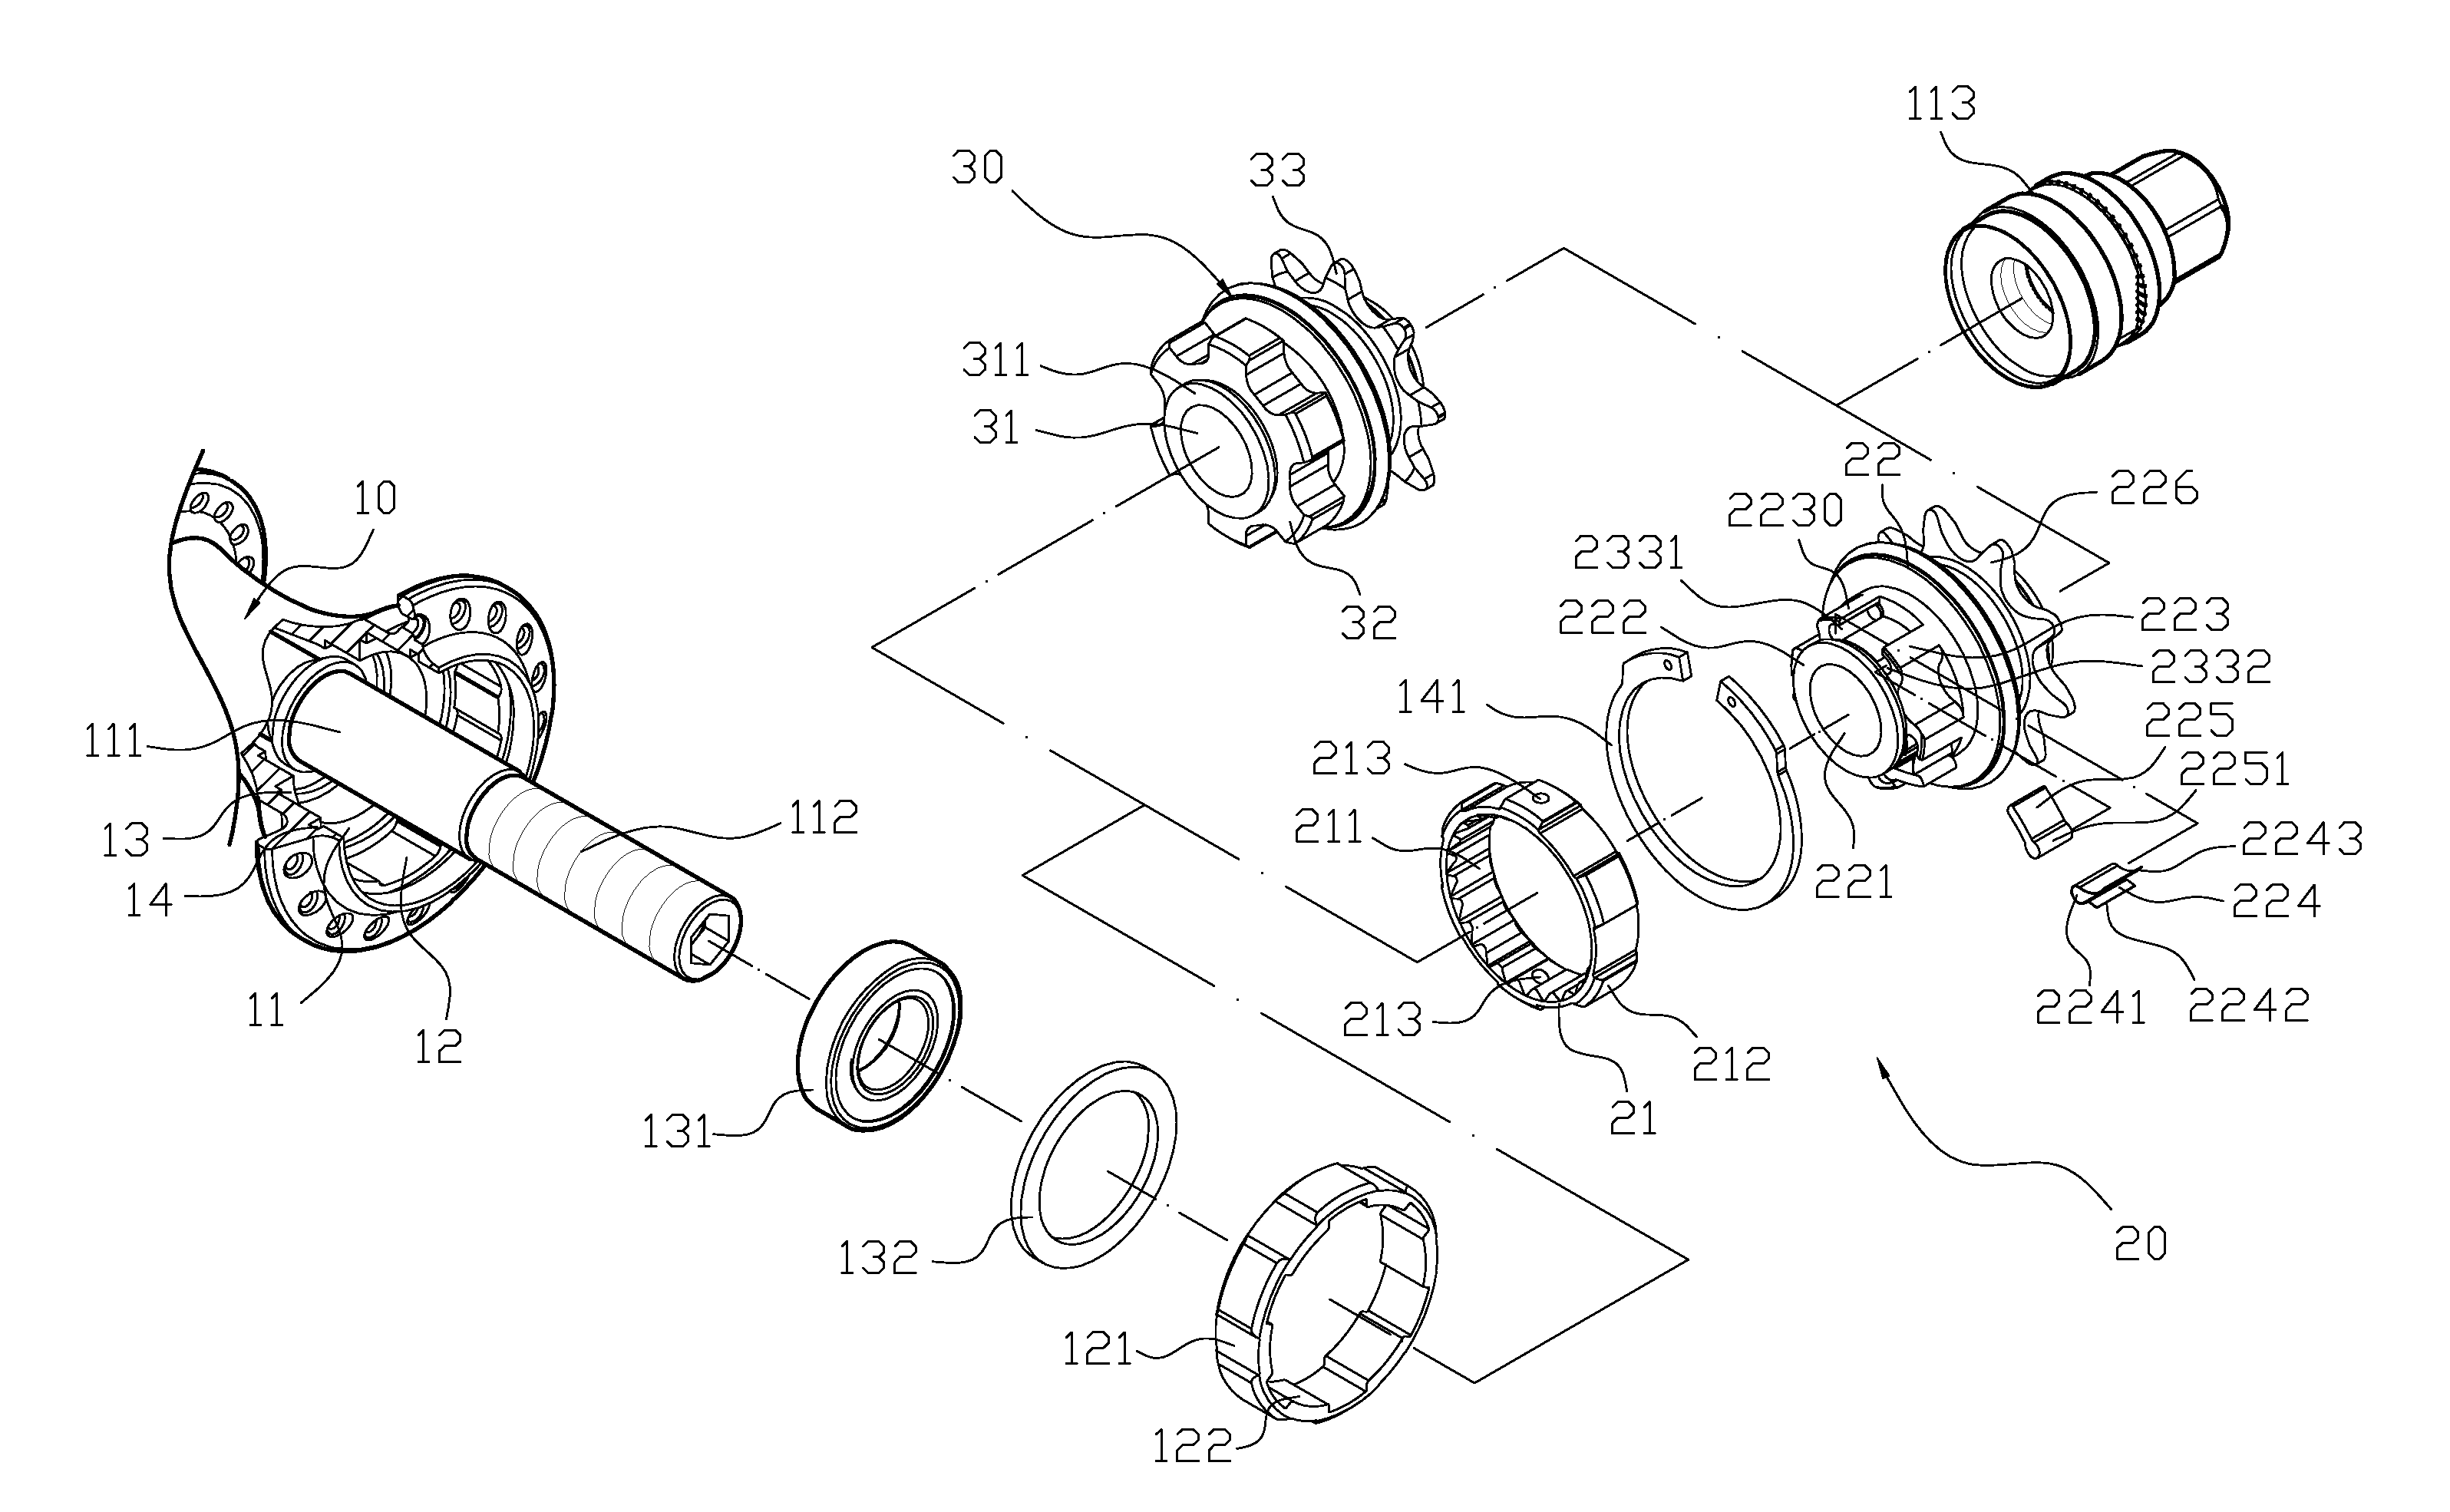 Driving apparatus for rear hub of bicycle